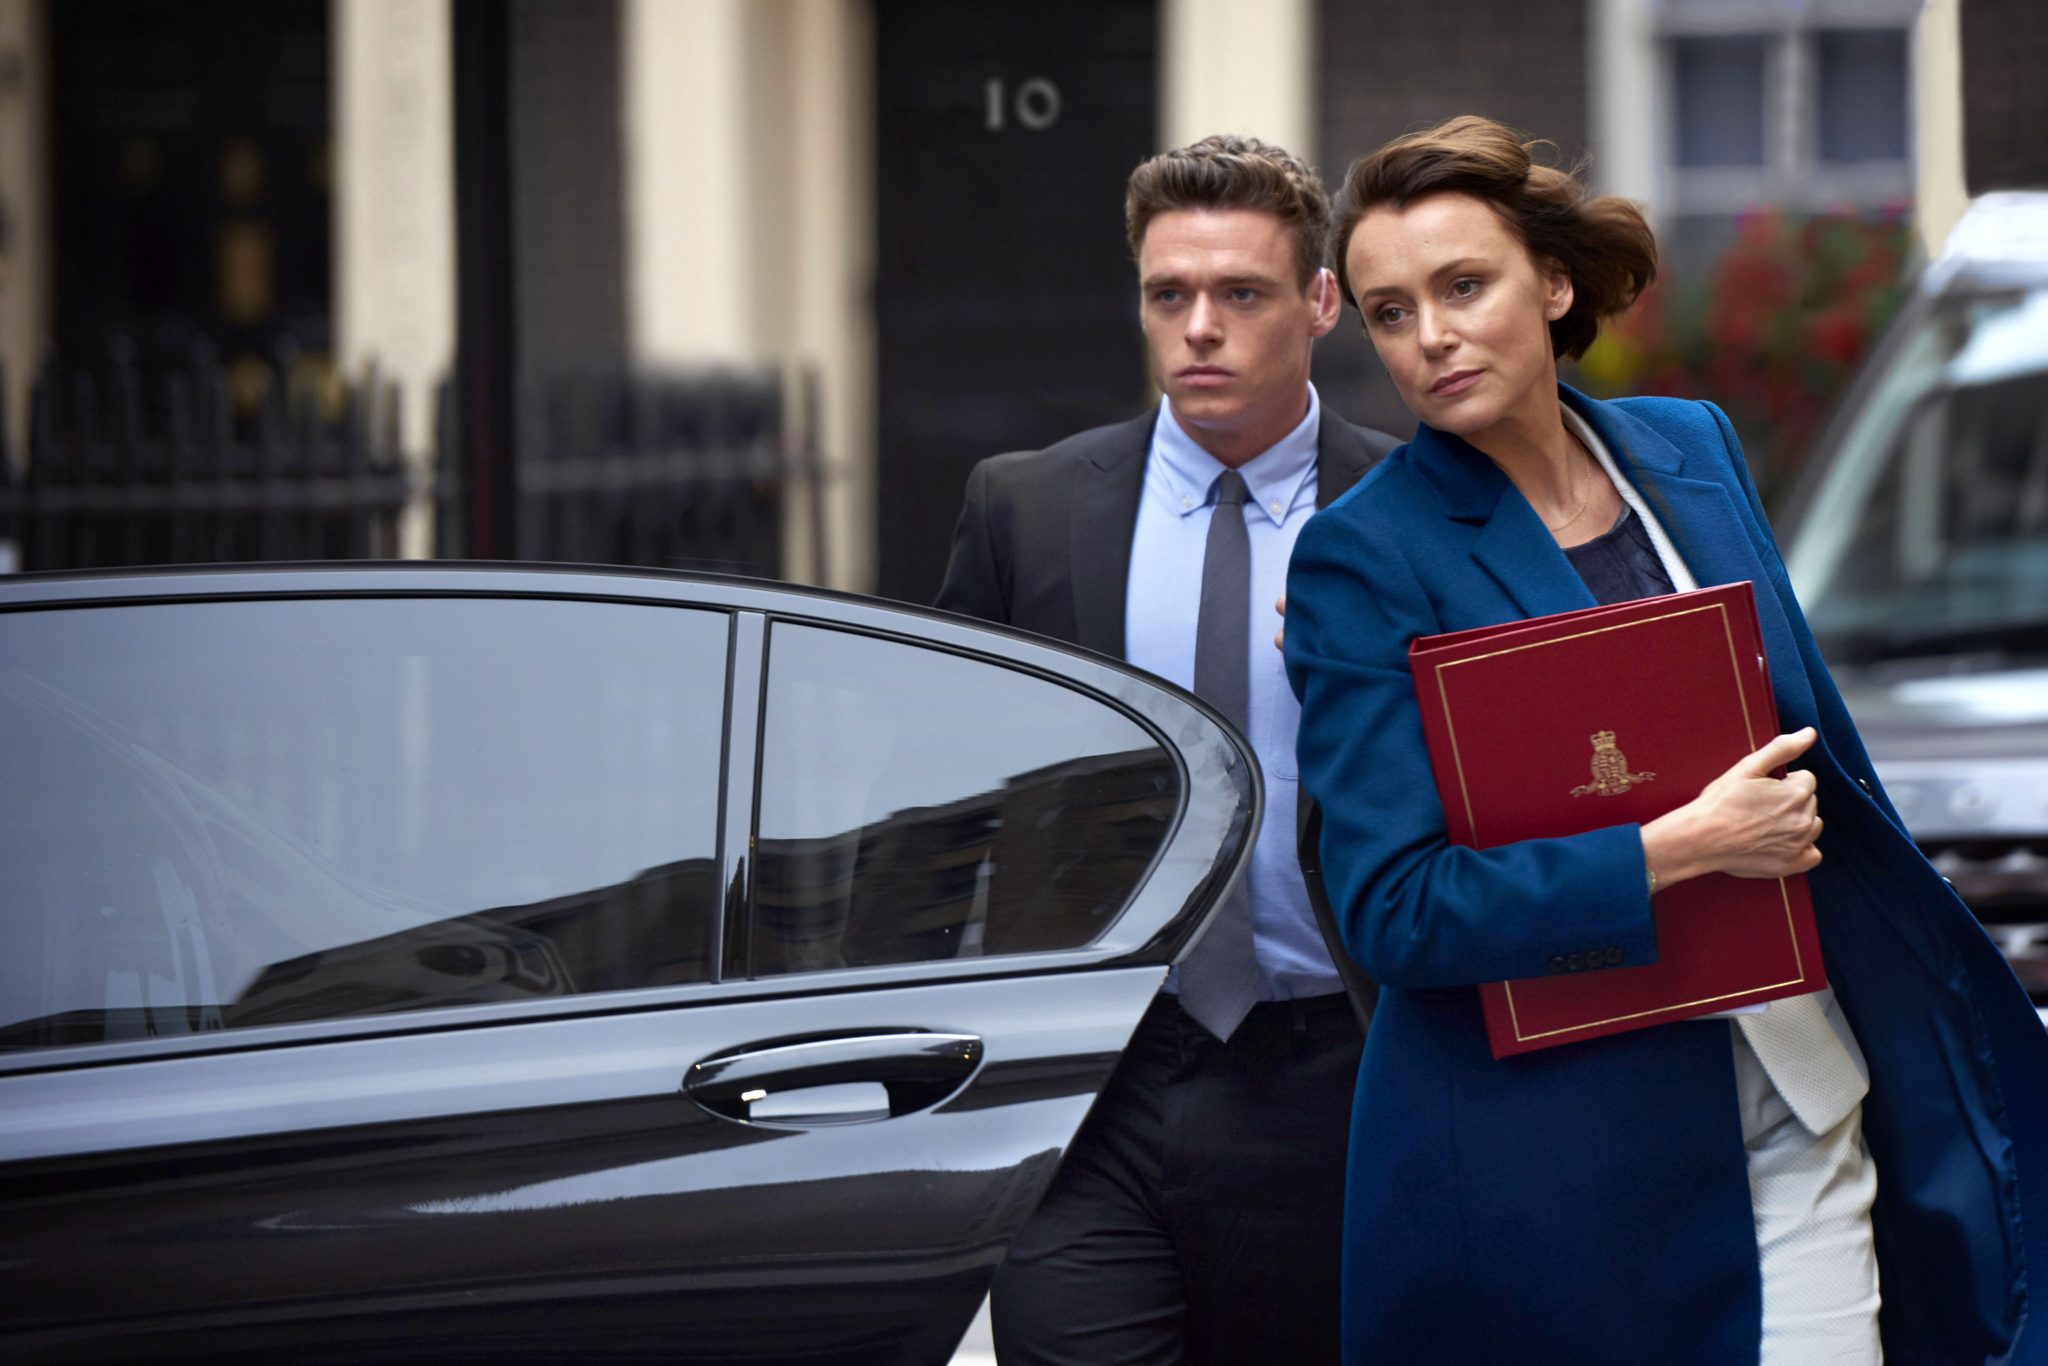 Bodyguard is 2018’s most feminist TV show – here's why